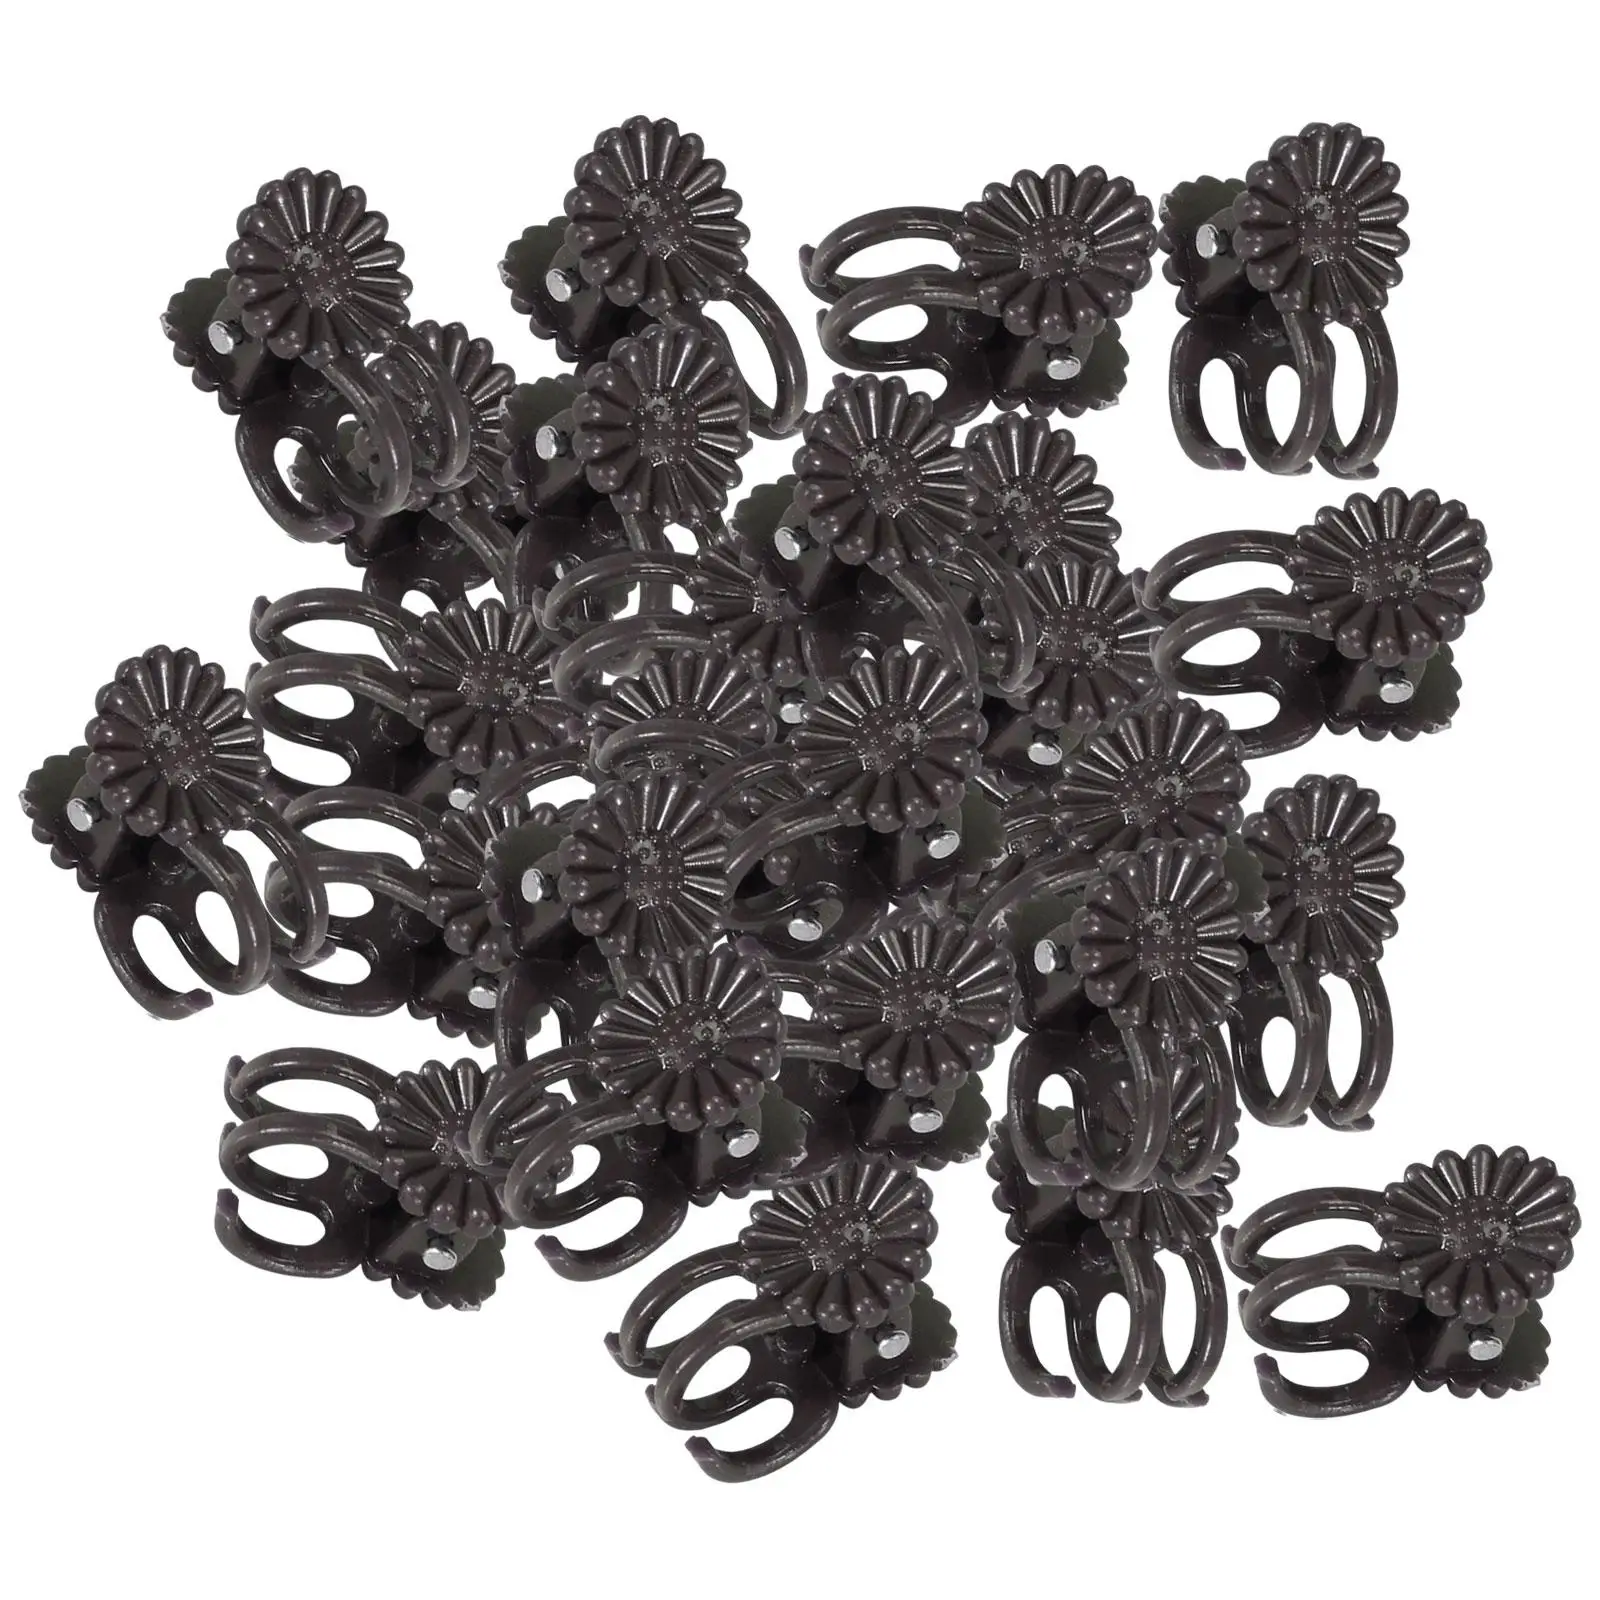 

30 Pieces Vine Clamp Plant Support Butterfly Orchid Clips for Trellis Plants Roses Support Flower Orchid Vine Garden Orchids